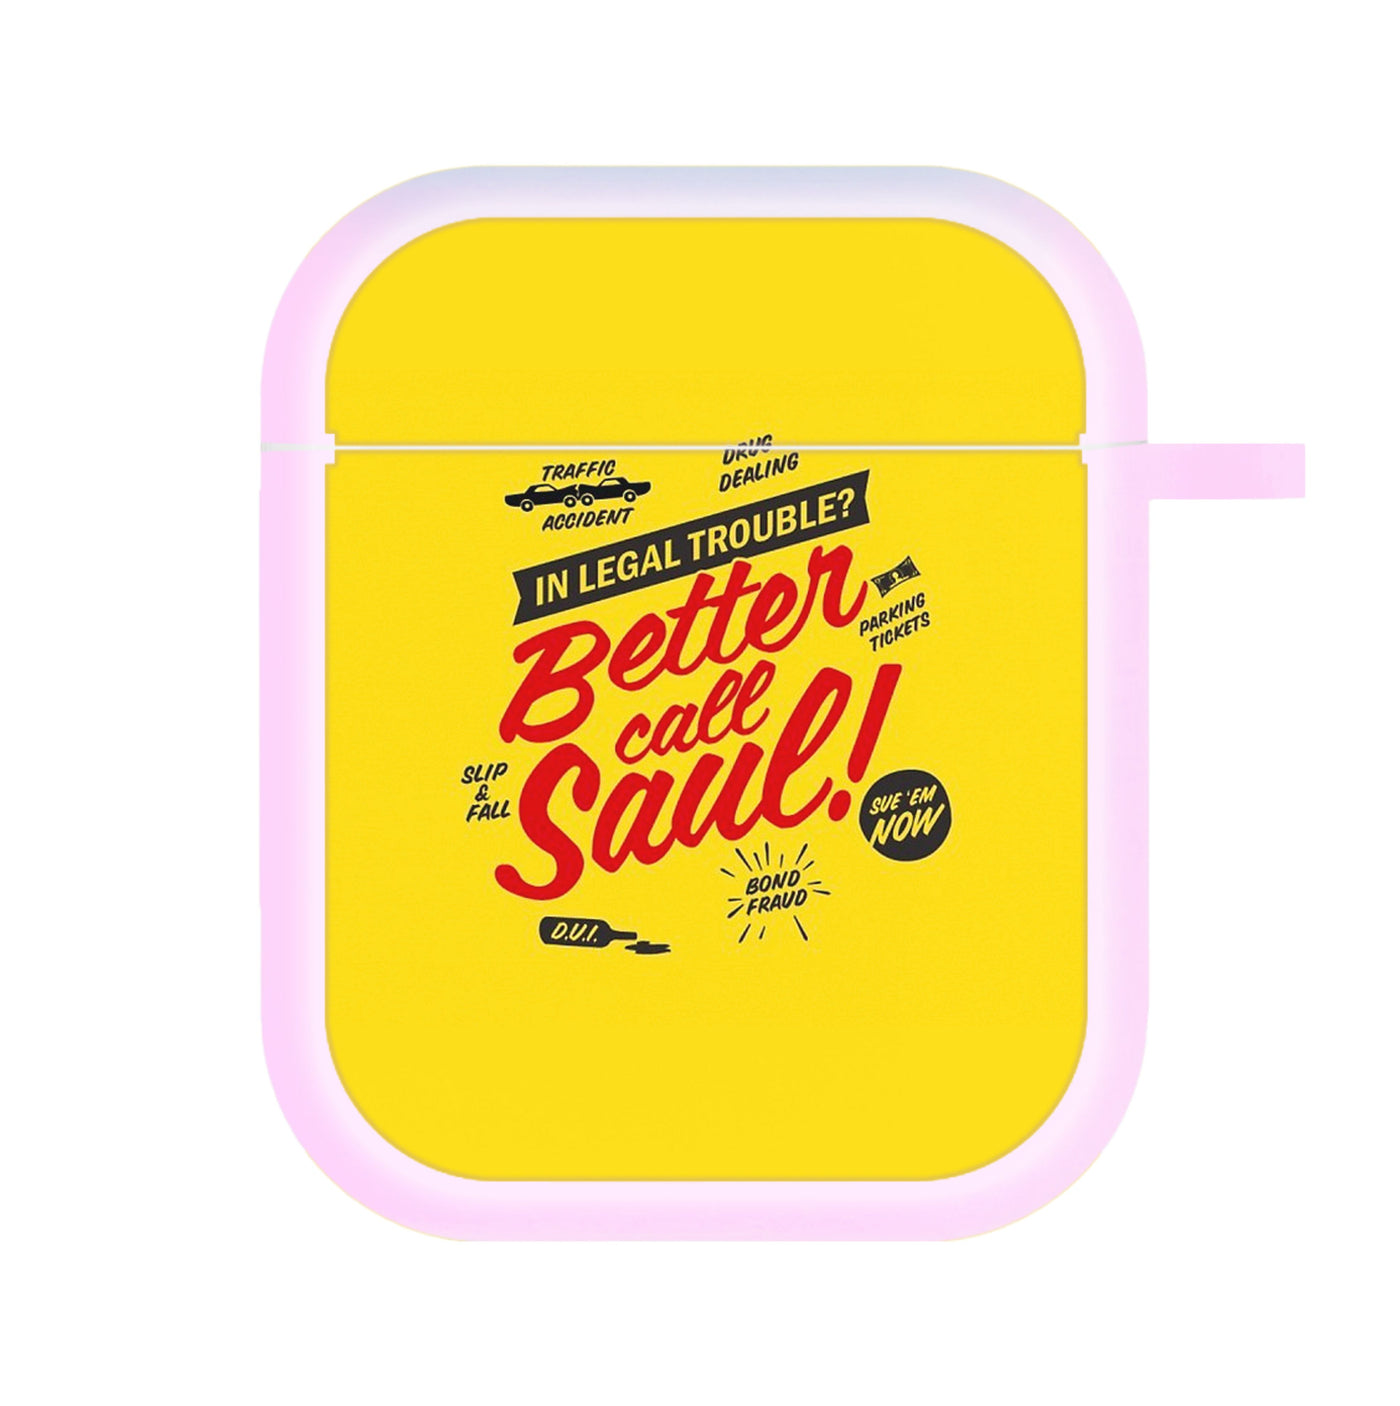 In Legal Trouble? Better Call Saul AirPods Case